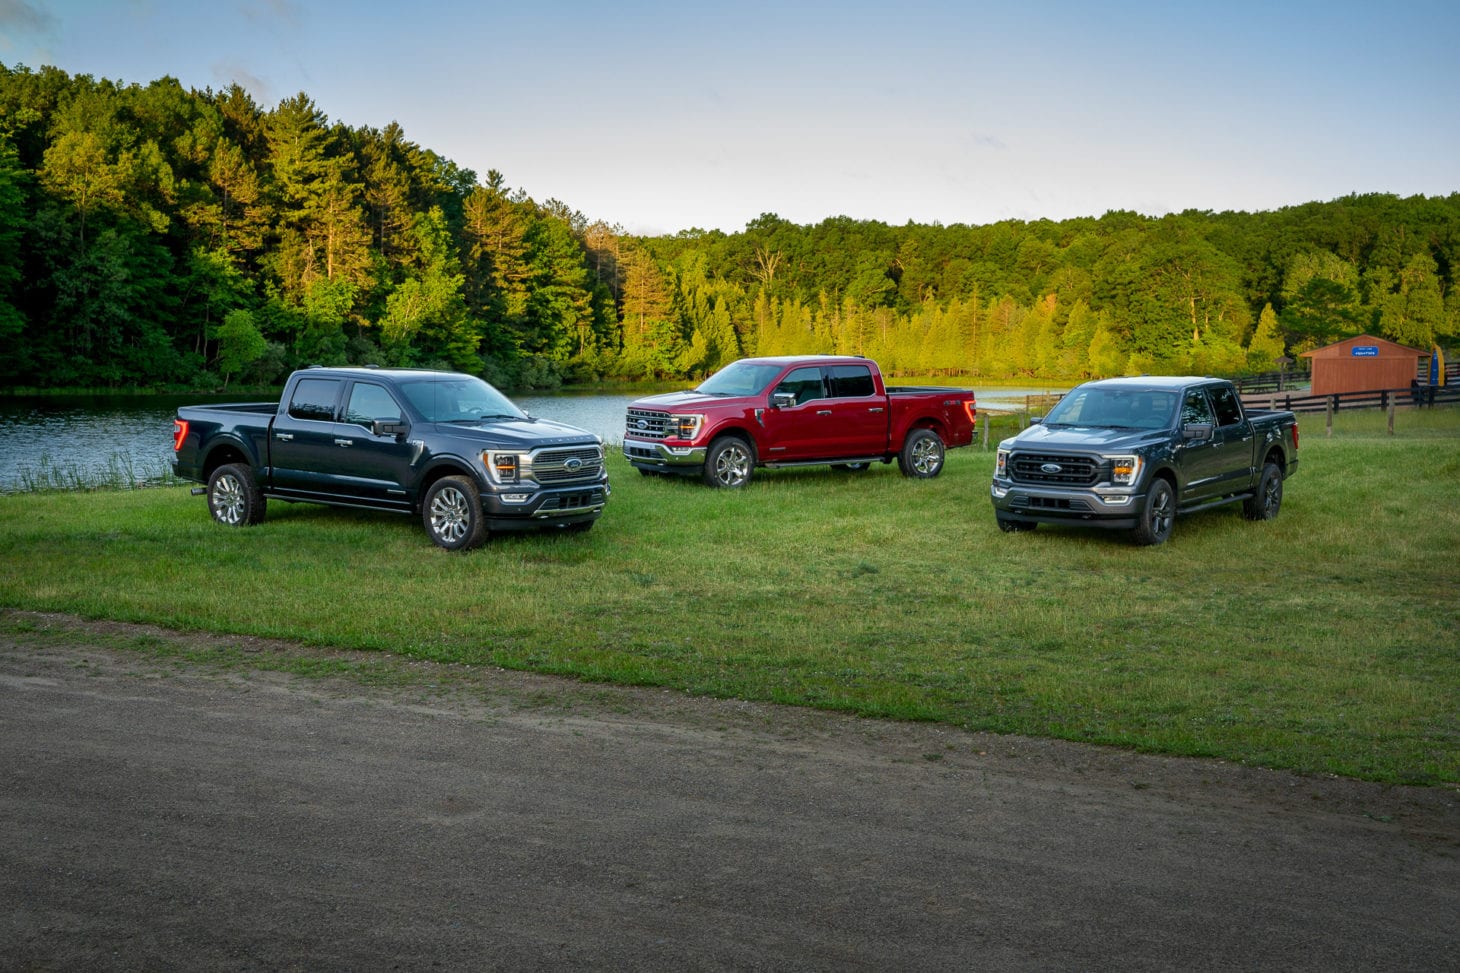 Group of Ford pickup trucks